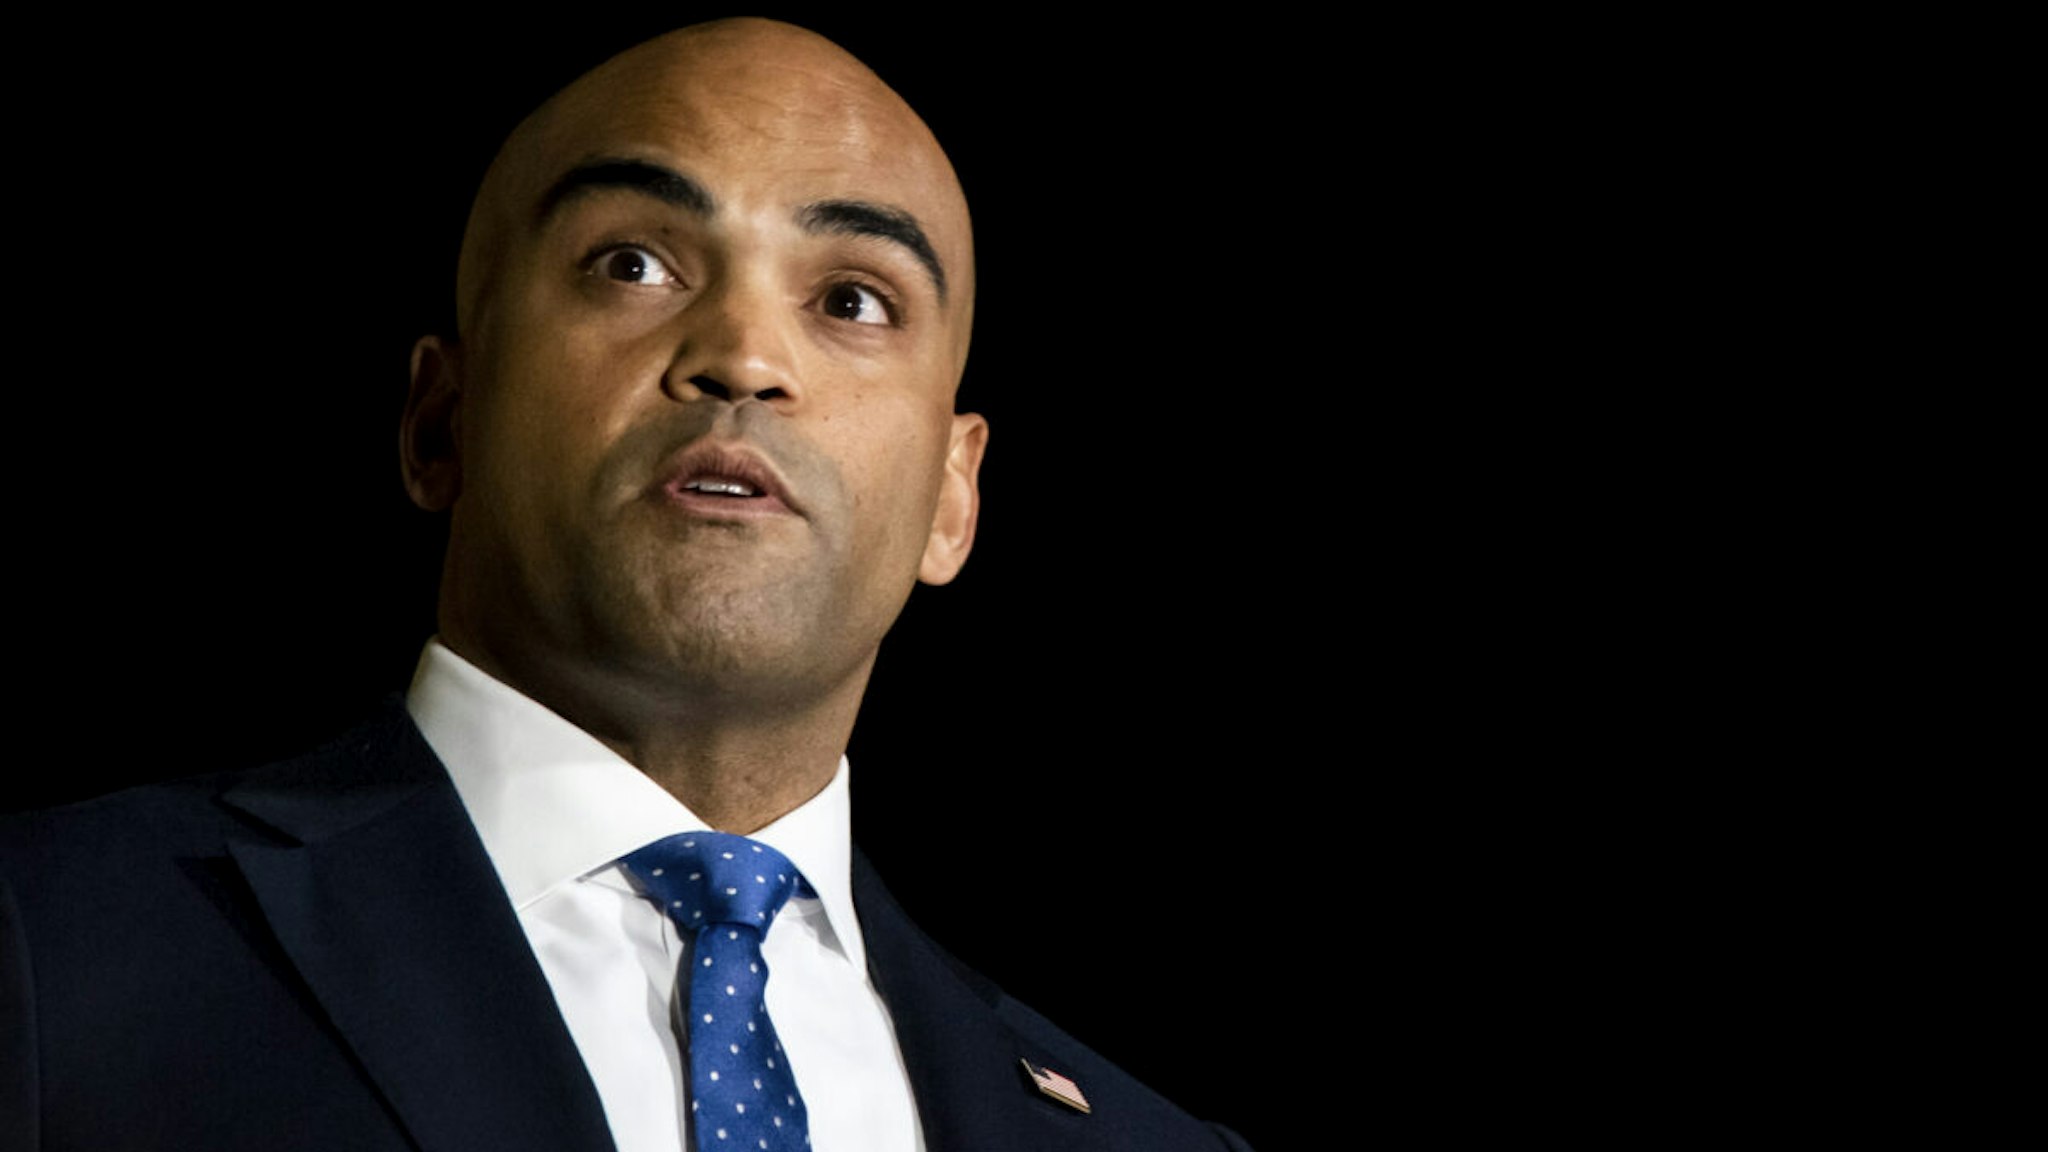 U.S. Rep. Colin Allred (D-TX) talks to a reporter following a special service on January 17, 2022 in Southlake, Texas.